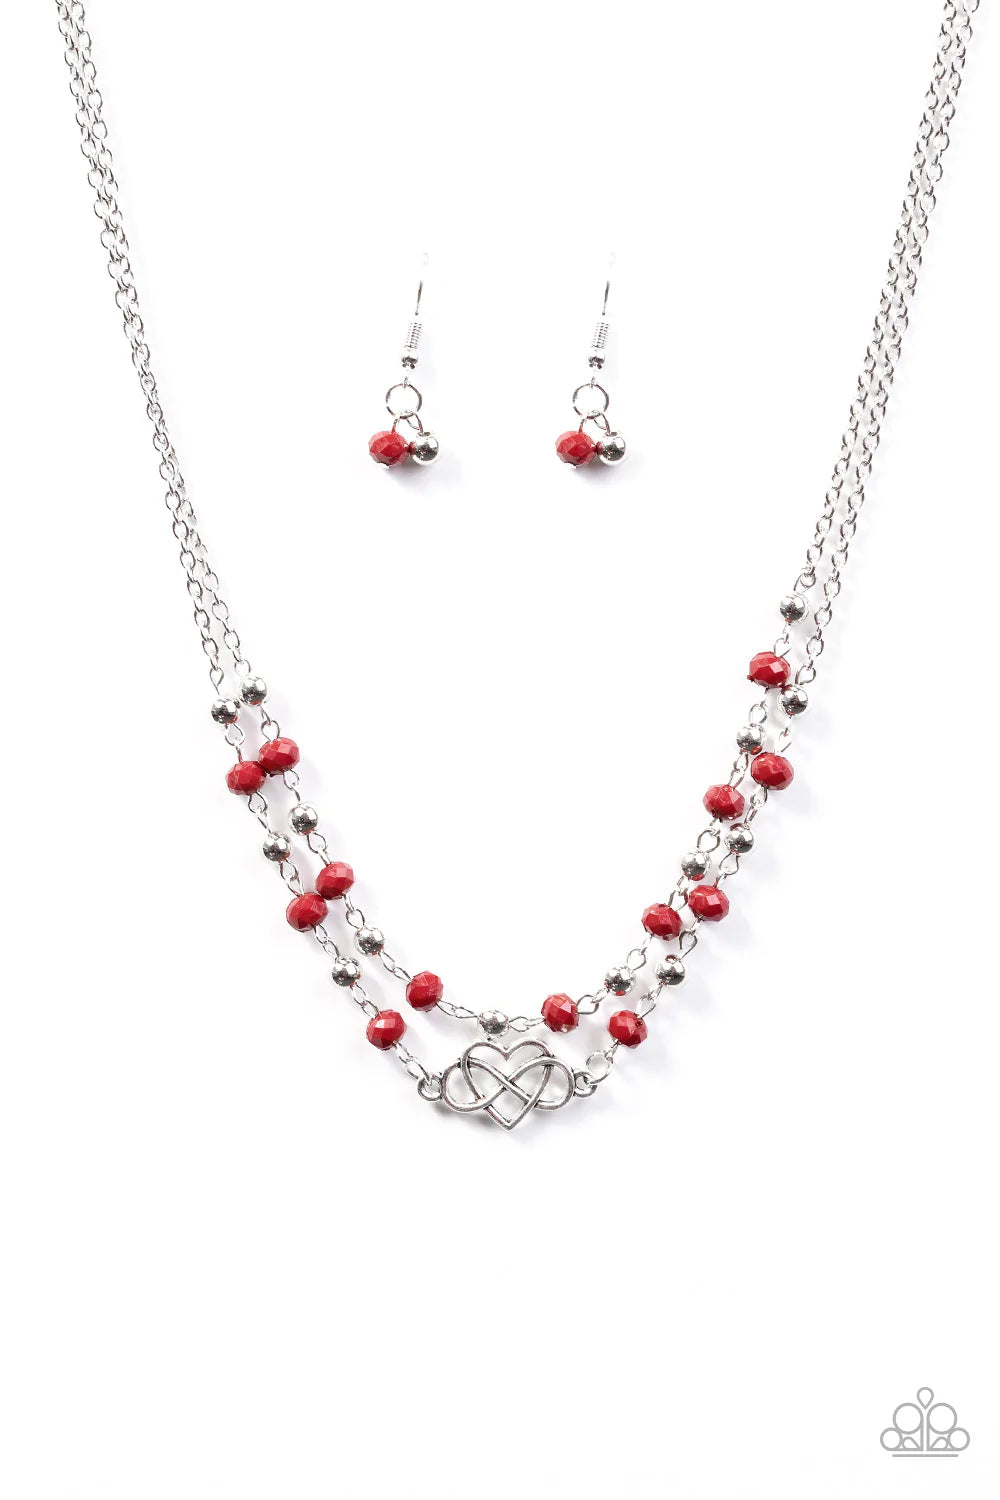 Paparazzi Necklace ~ Unbreakable Love - Red